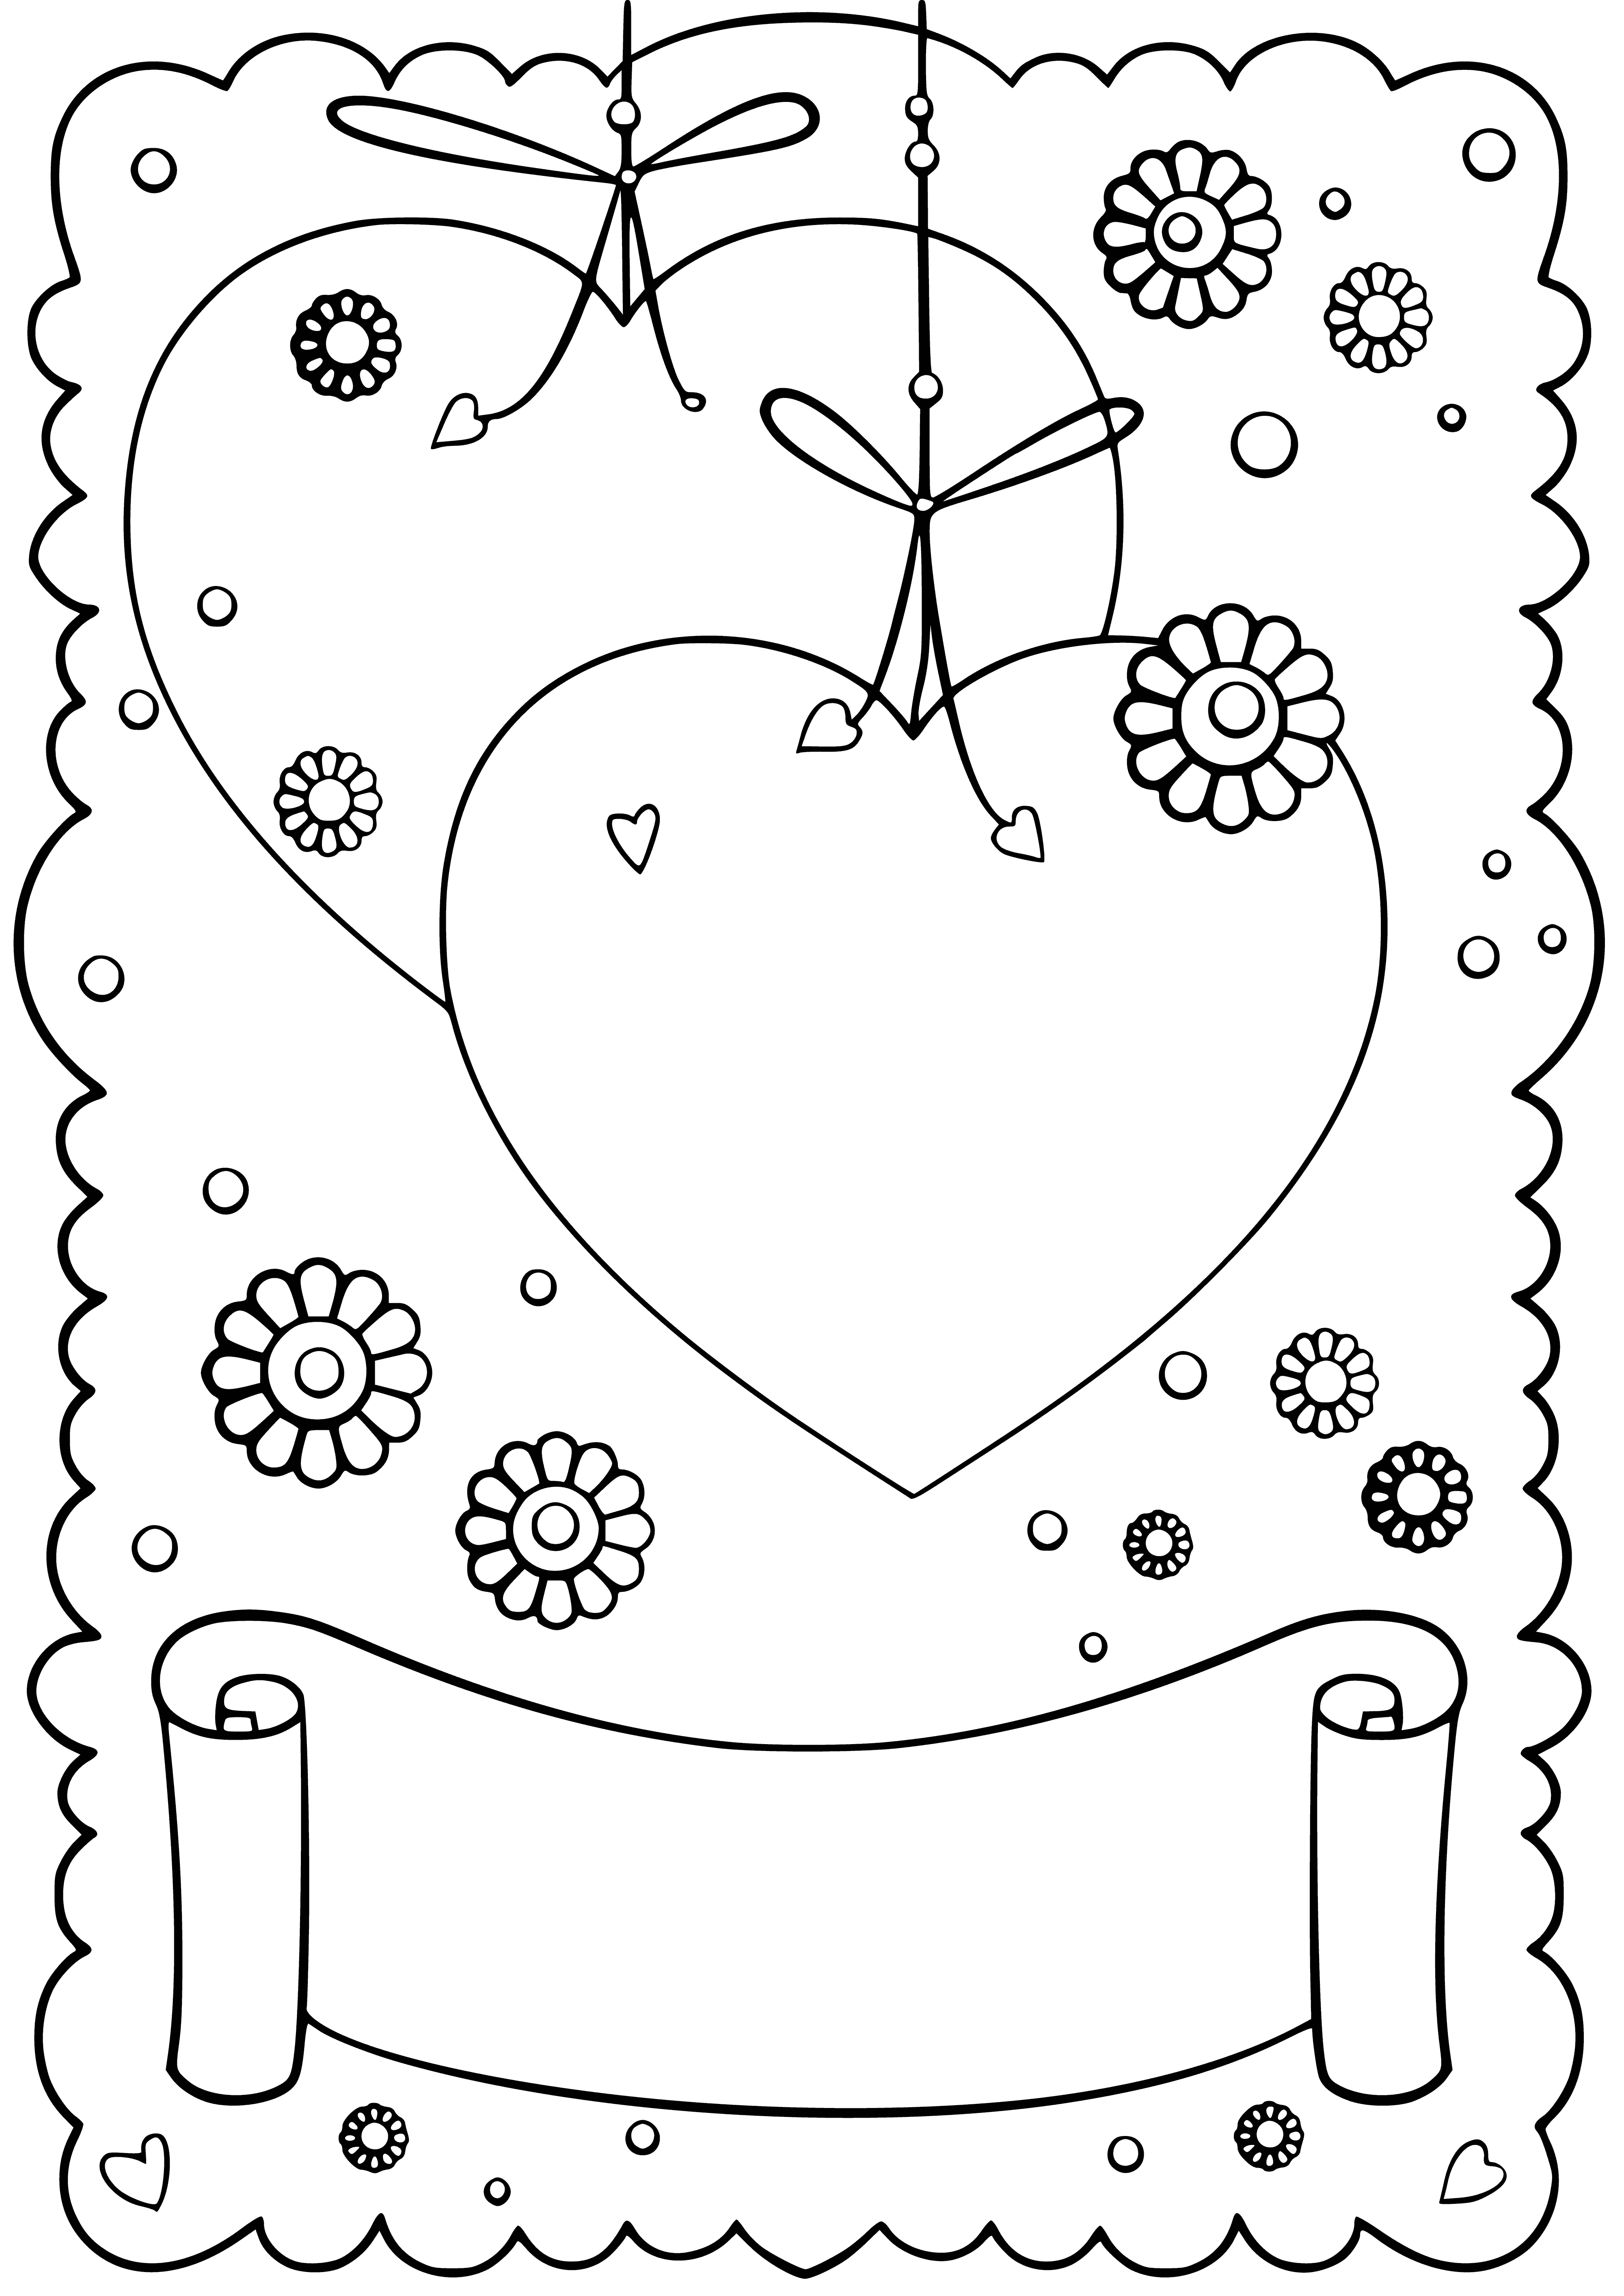 coloring page: Large red heart with white "Valentine's", "Happy Day", "To My Valentine" & "I Love You" written on it on green background. #ValentinesDay